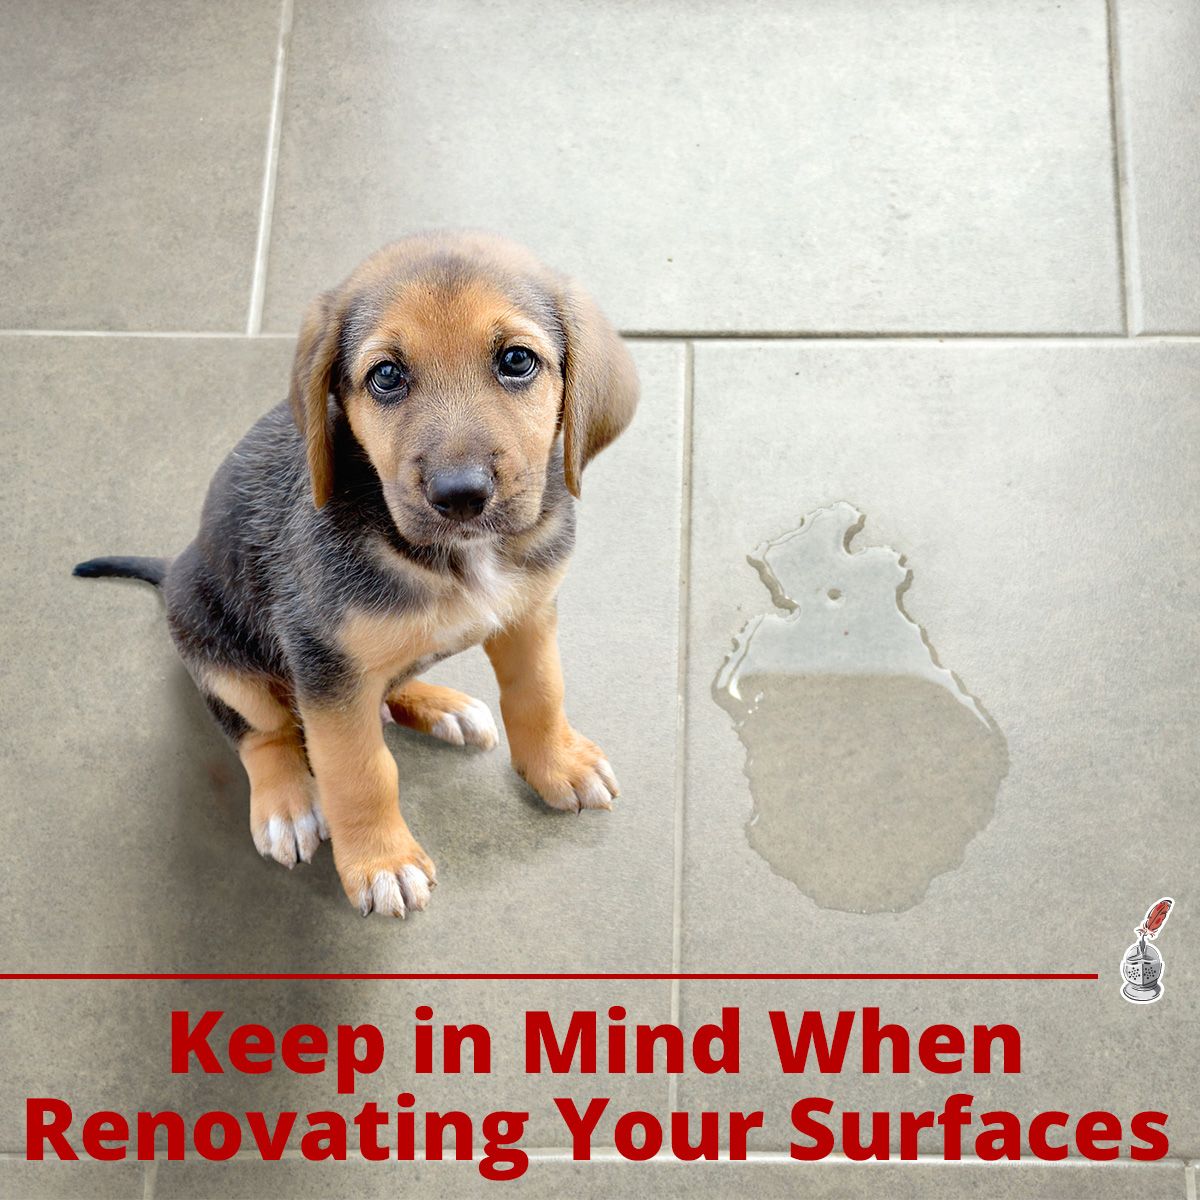 Keep in Mind When Renovating Your Surfaces